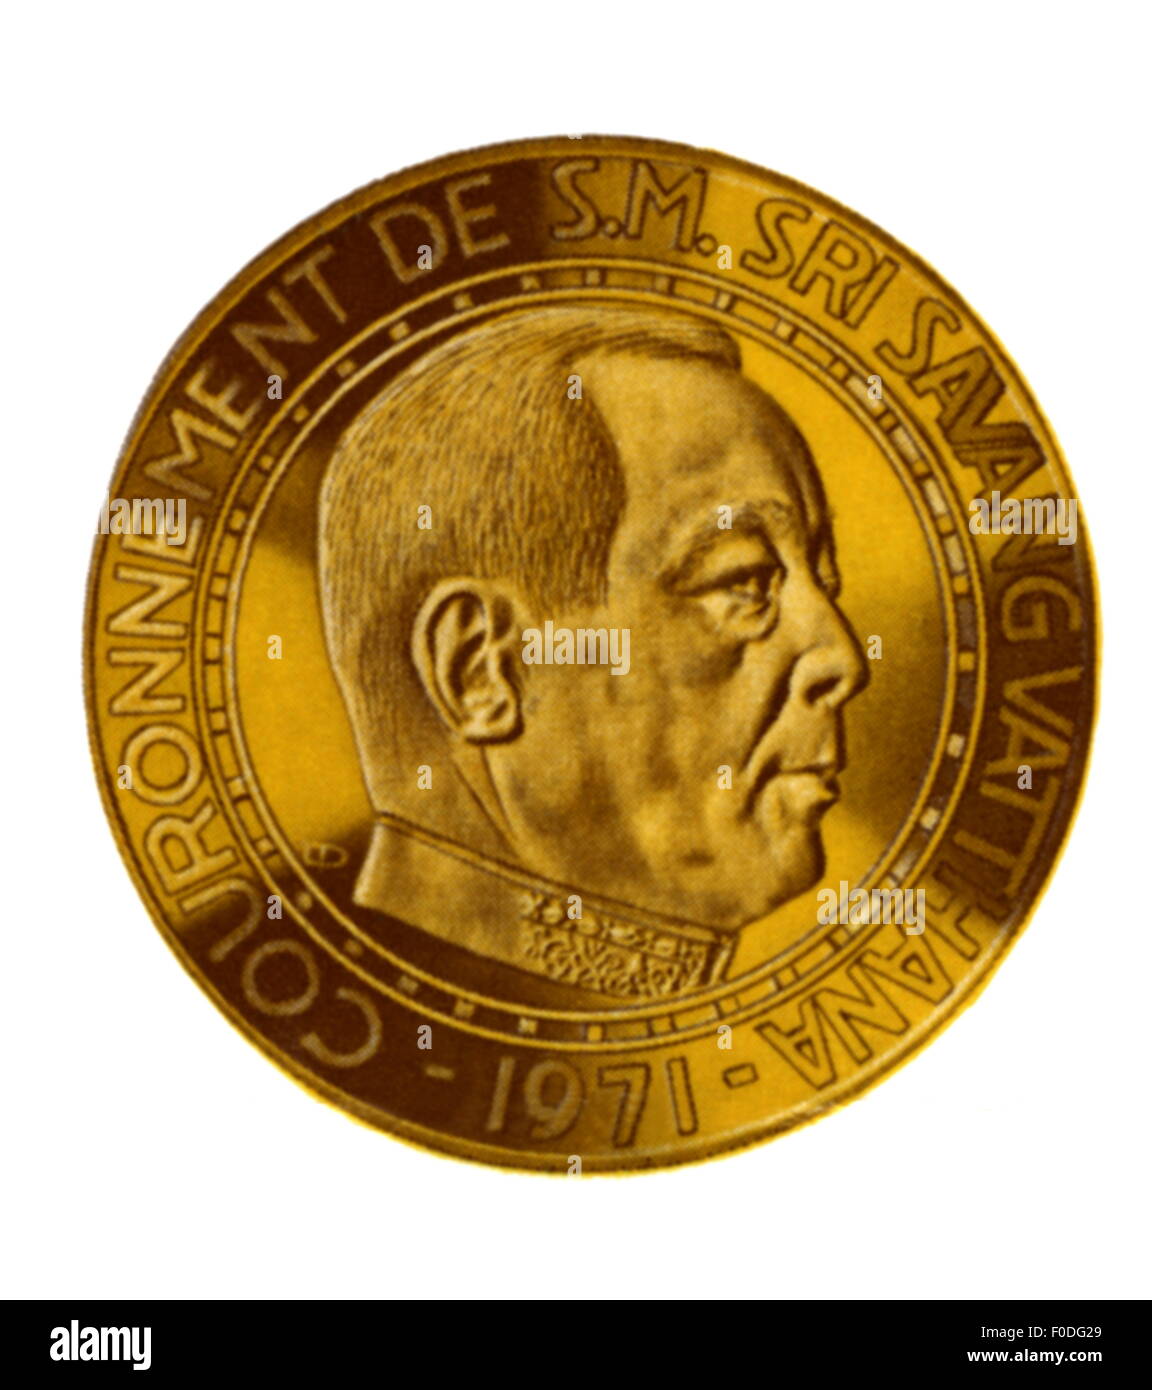 money / finances, coins, Laos People's Democratic Republic, commemorative coin on the occasion of the coronation of king Sisavang Vatthana, coined by the State Mint Munich, obverse, gold, 1971, Additional-Rights-Clearences-Not Available Stock Photo